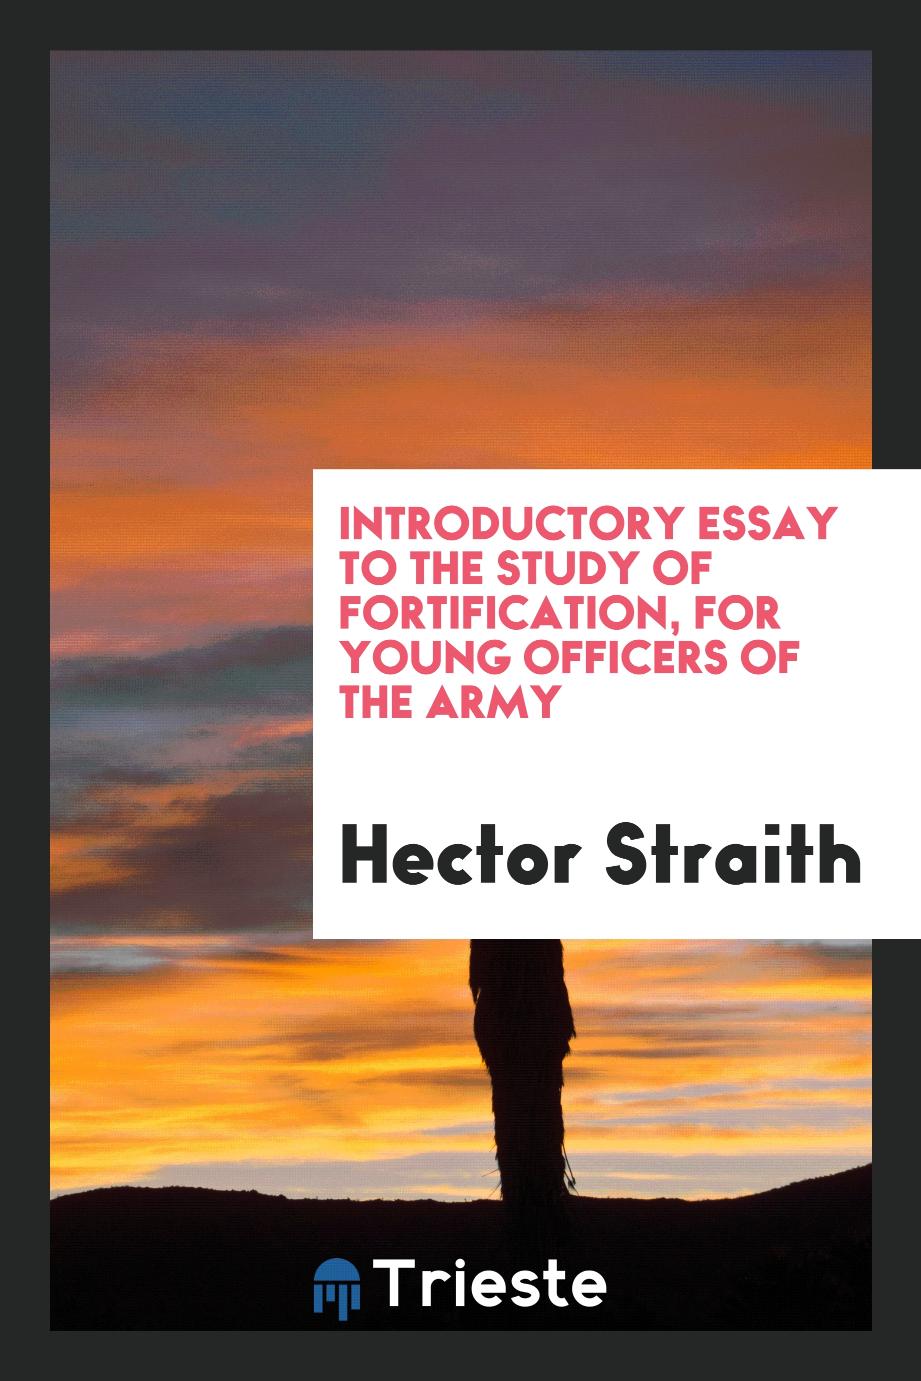 Introductory essay to the study of fortification, for young officers of the army